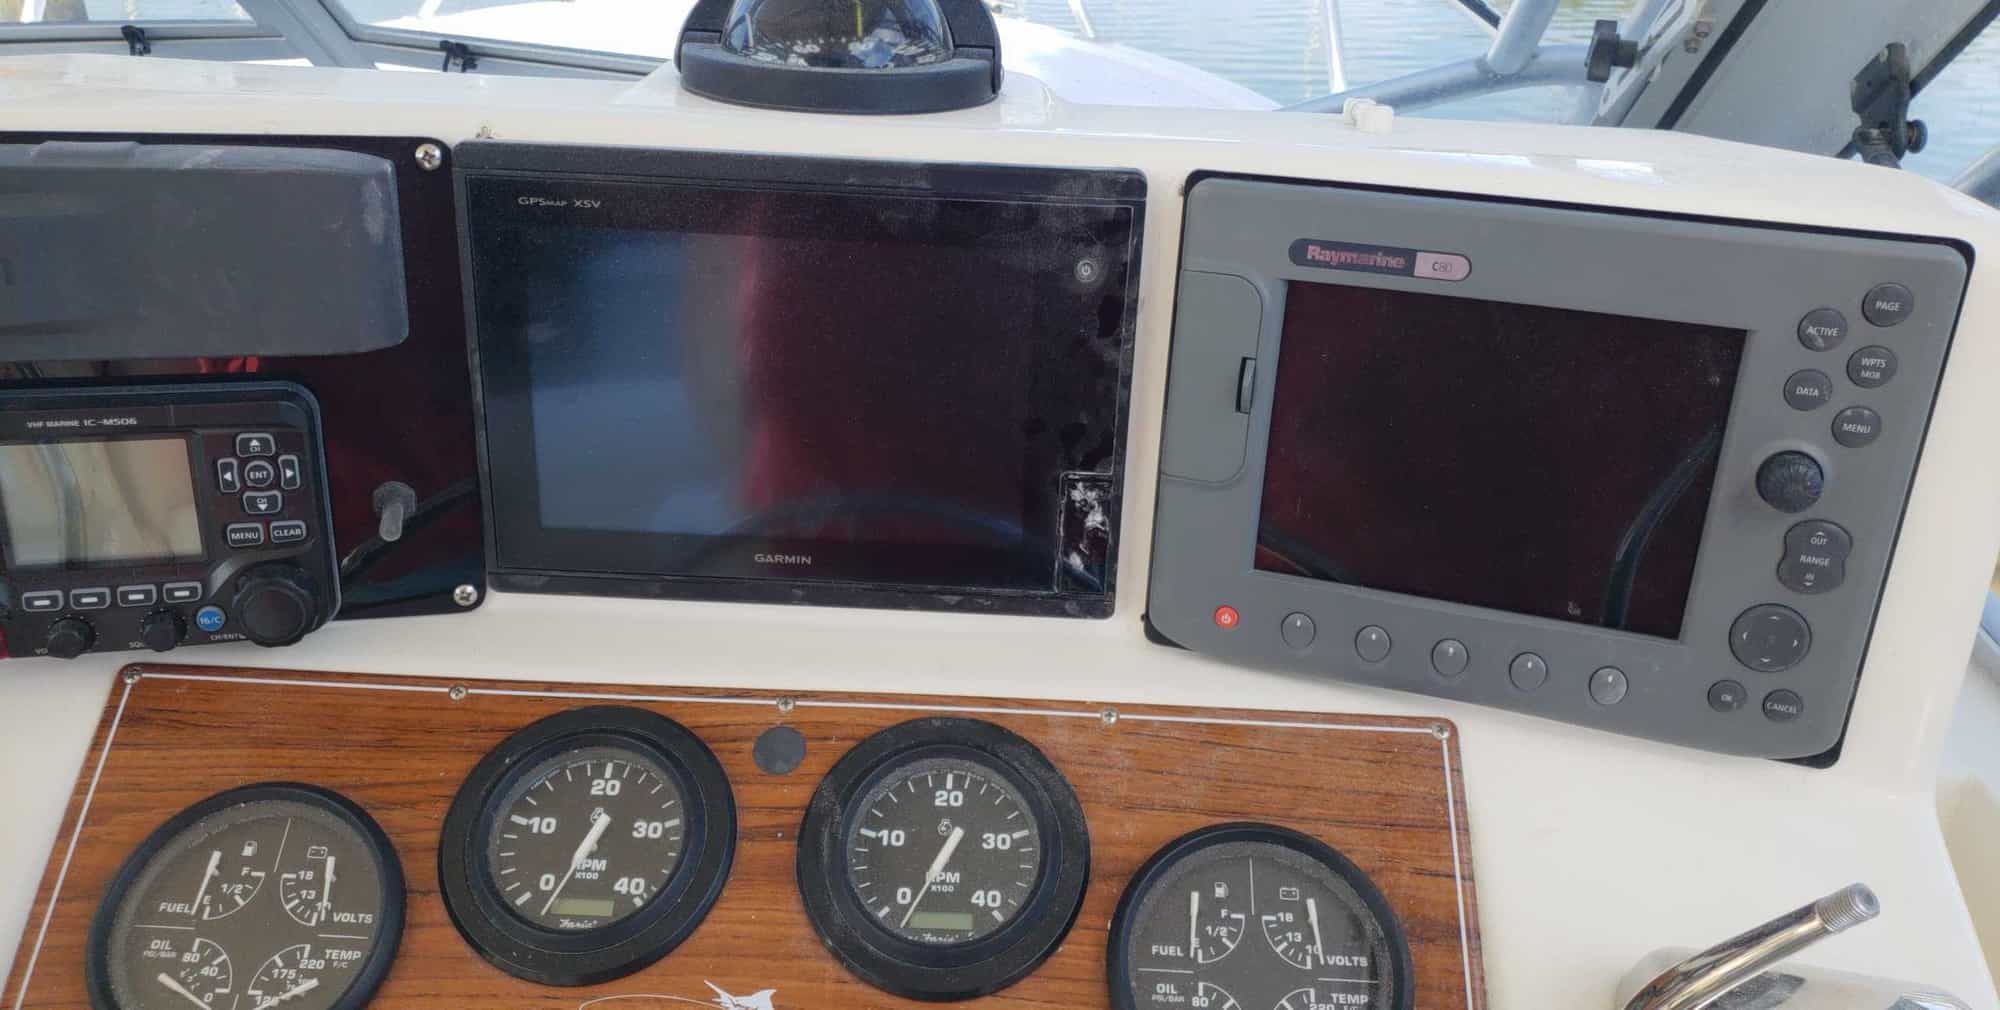 Viper VPS540 GPS Tracker - The Hull Truth - Boating and Fishing Forum